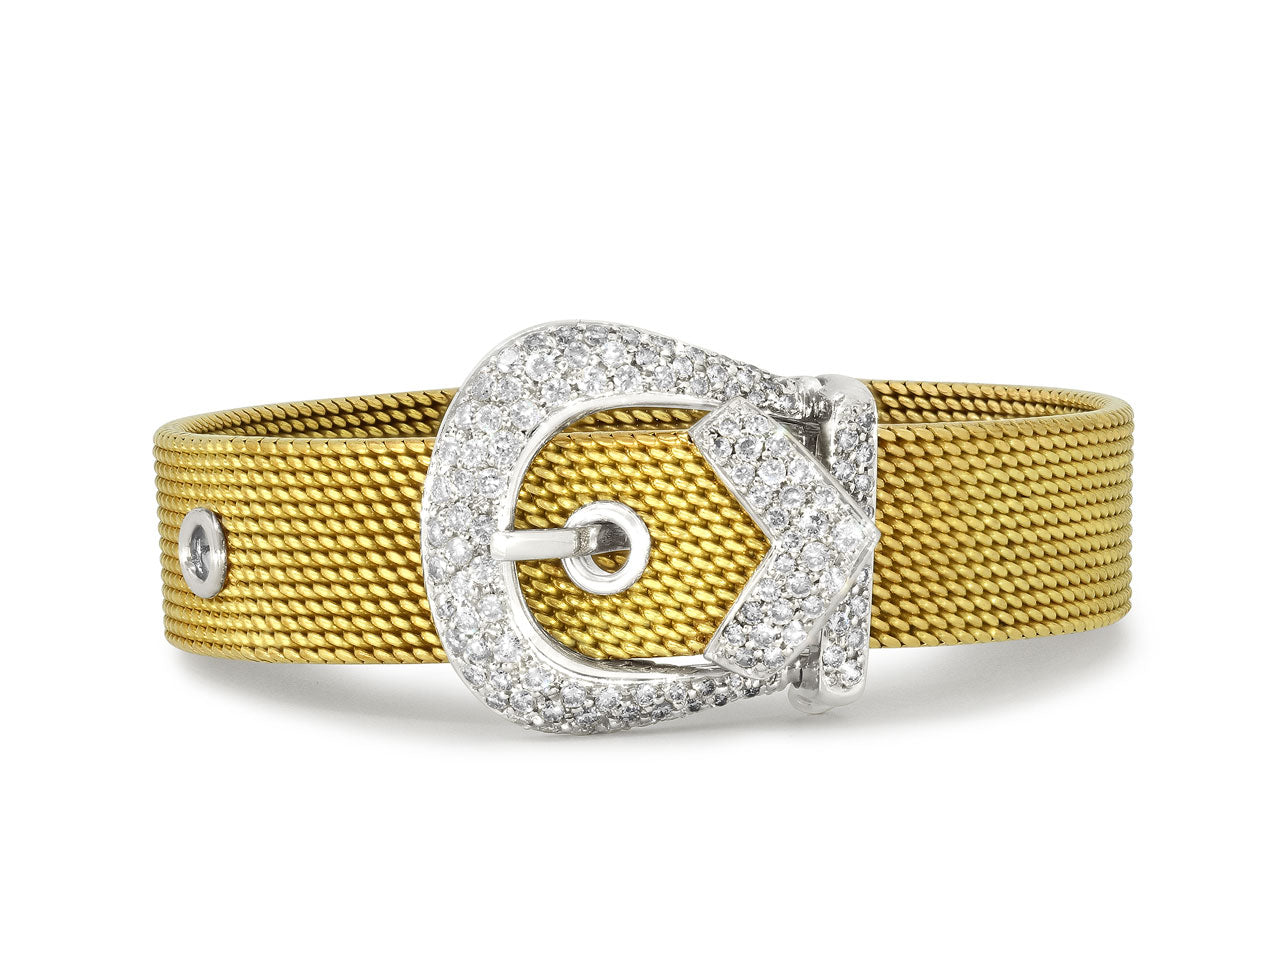 Diamond Buckle Bracelet in 18K Yellow and White Gold